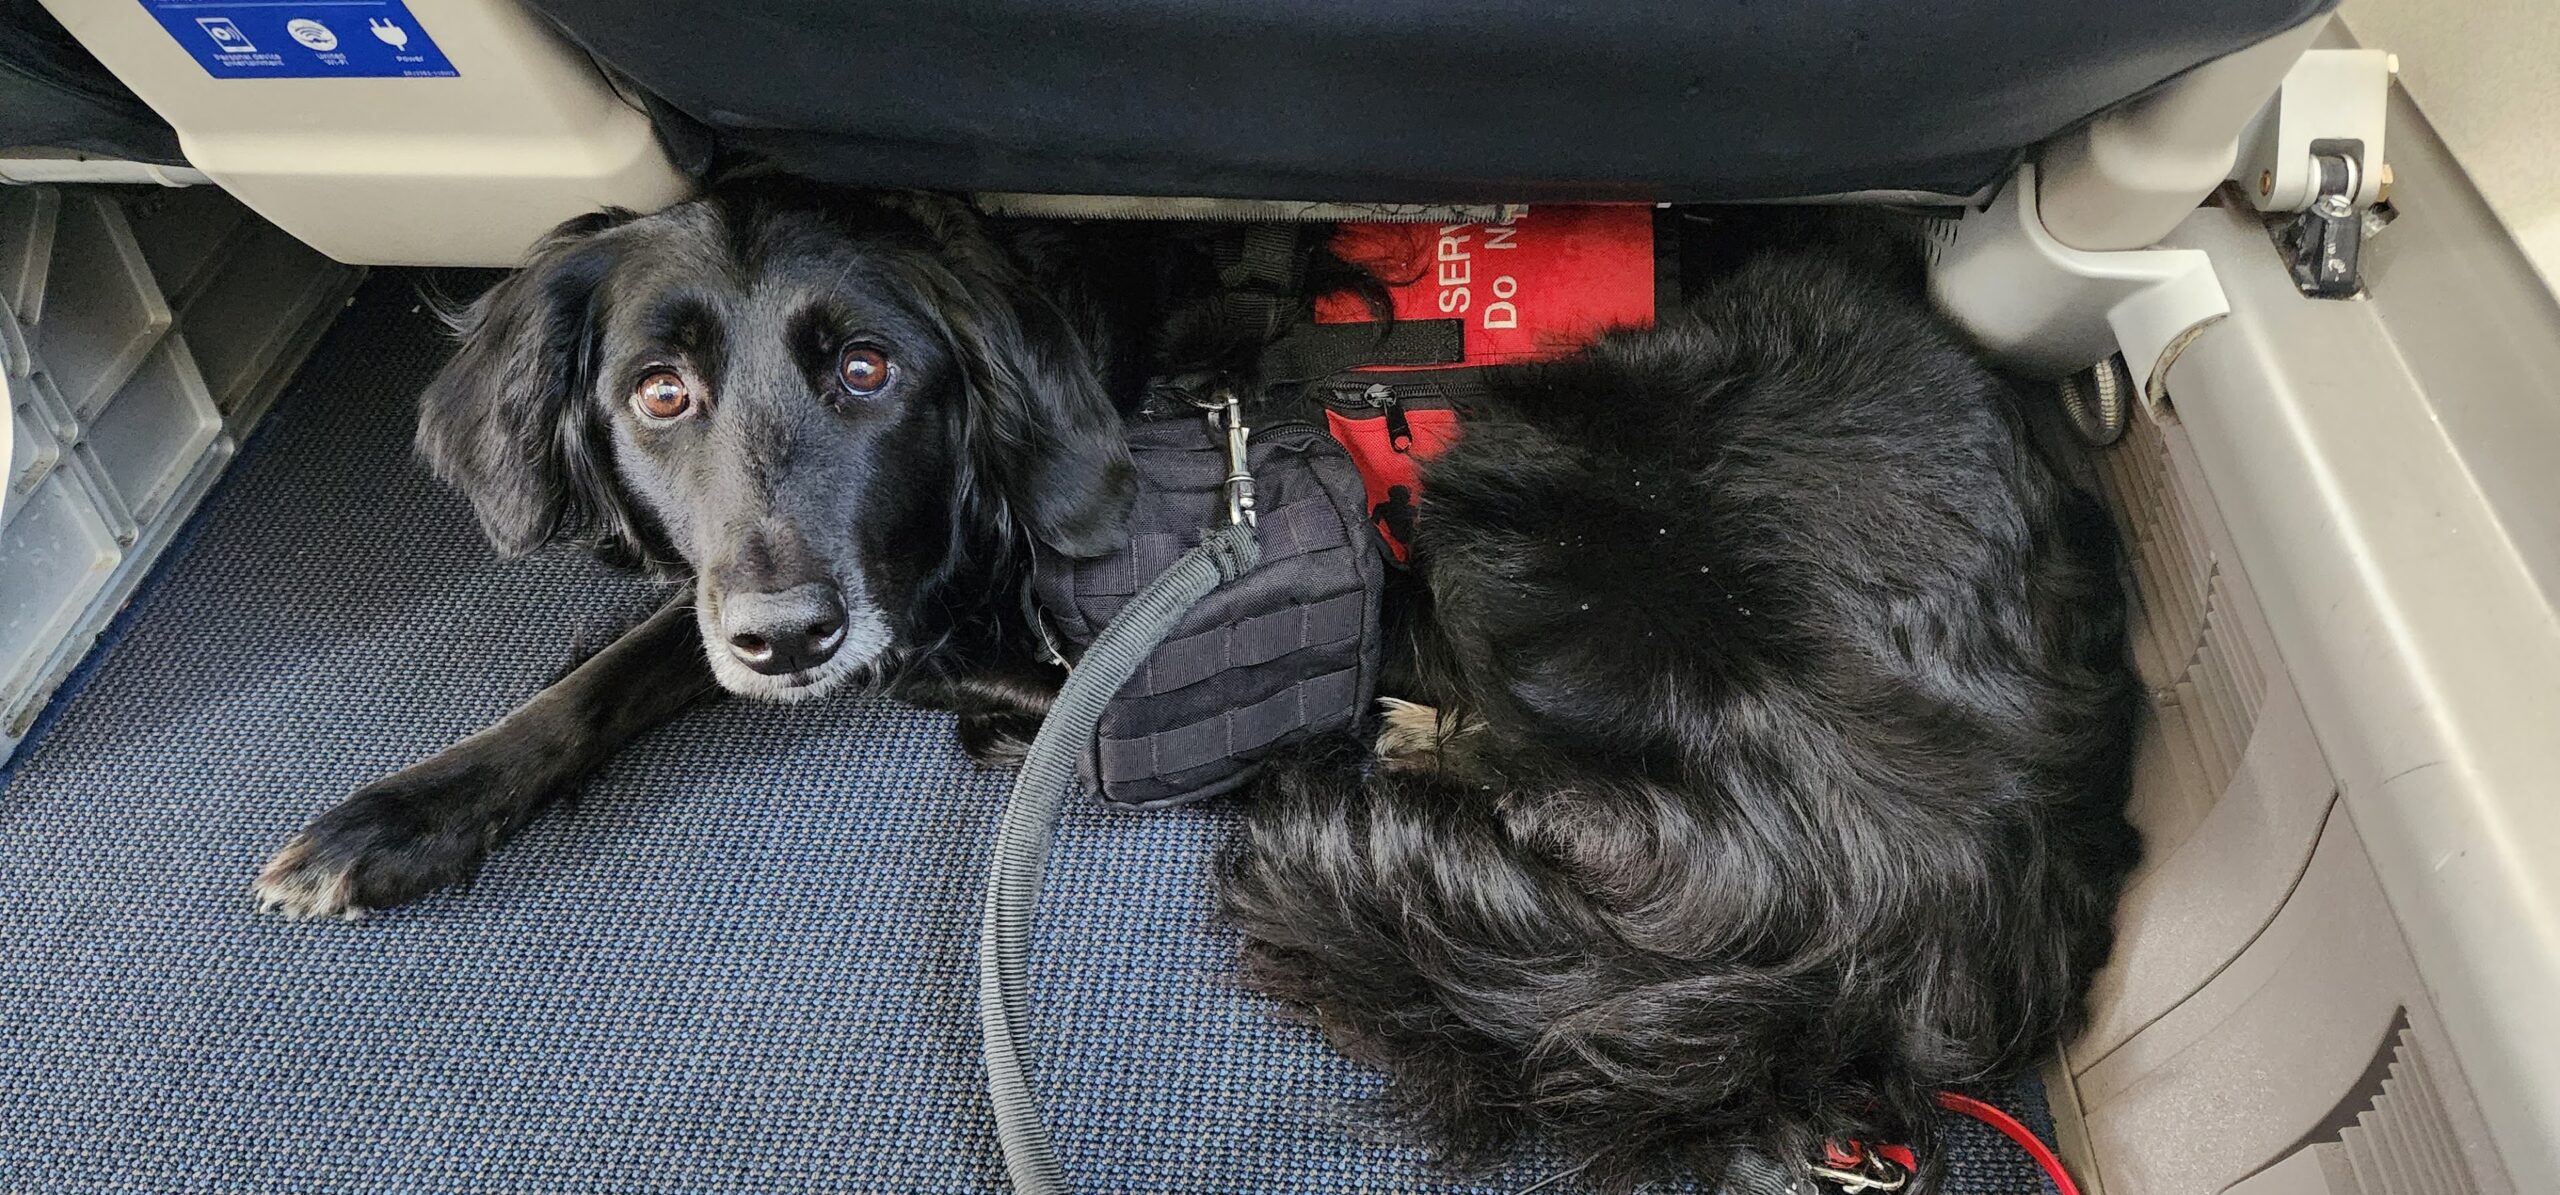 Psychiatric Autism Service Dog works for handler during a Flight